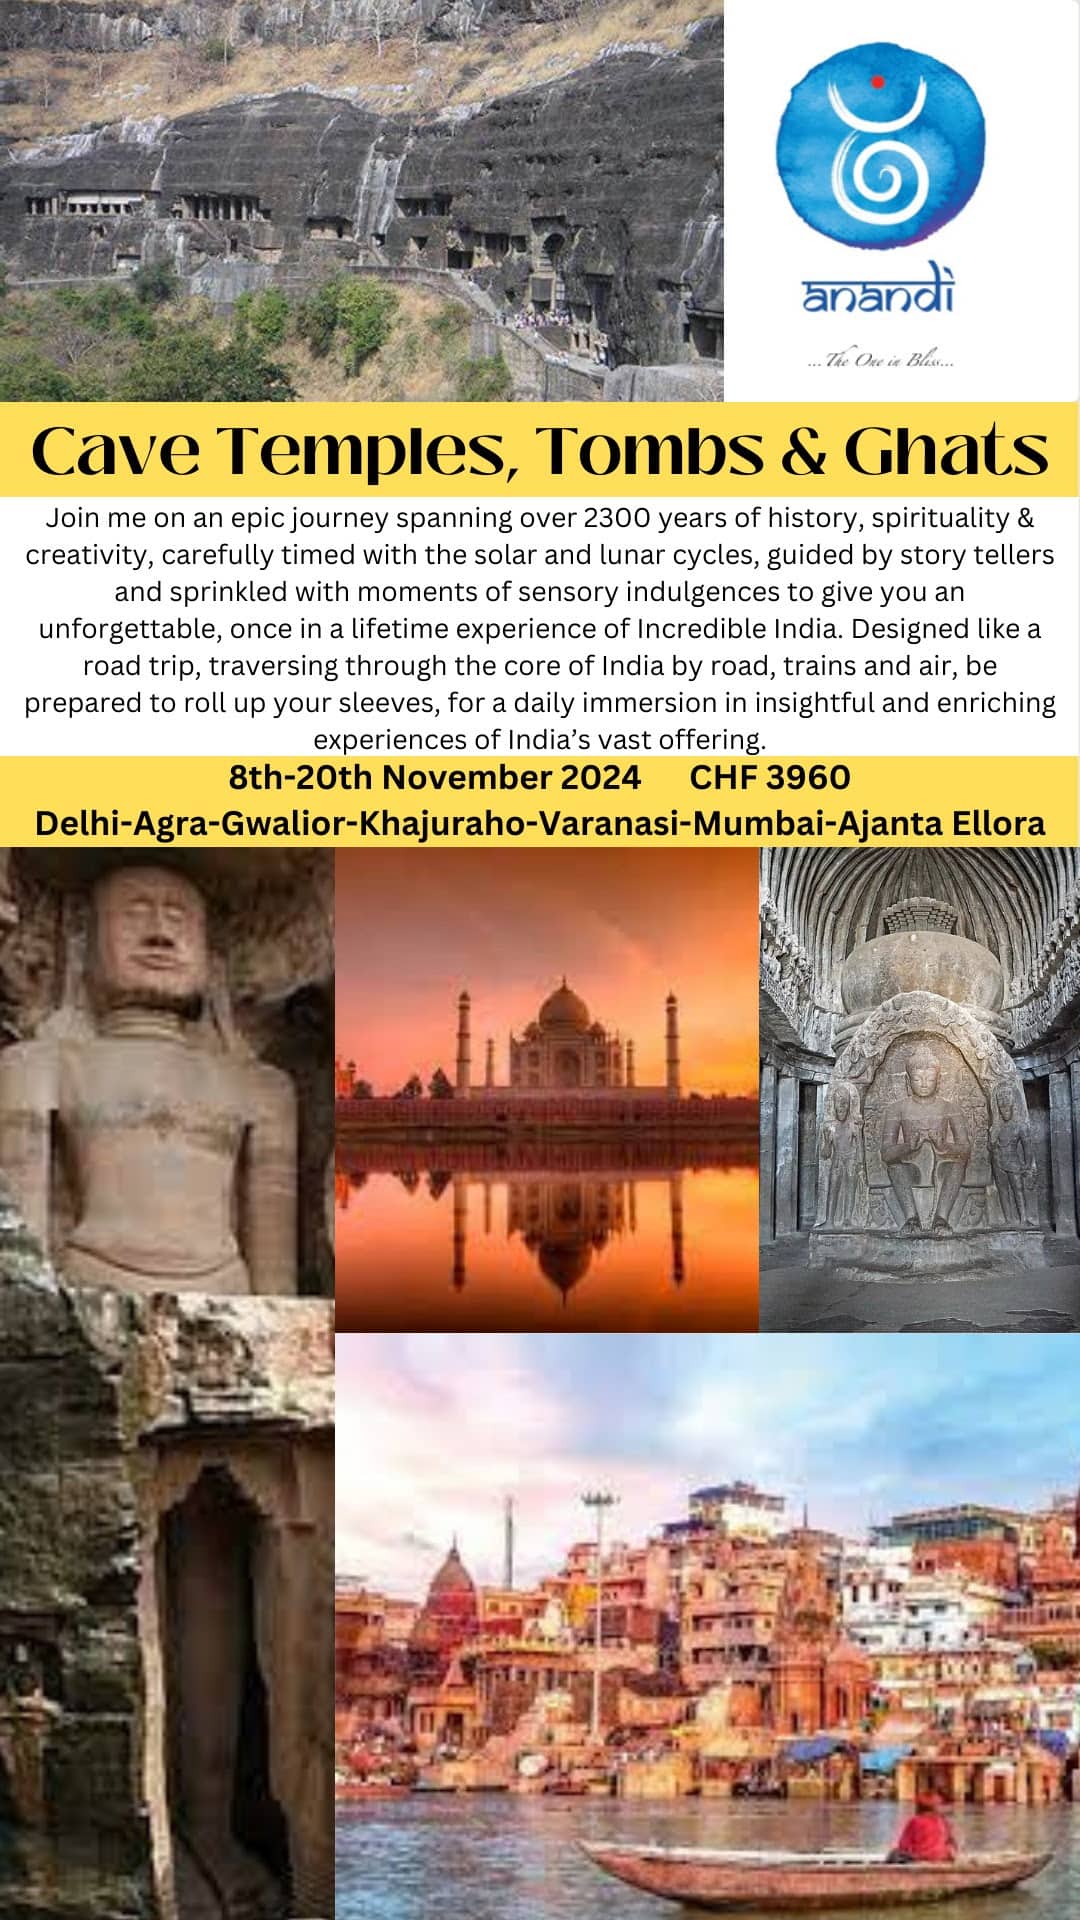 India Yatra: Rock Temples, Tombs & Ghats